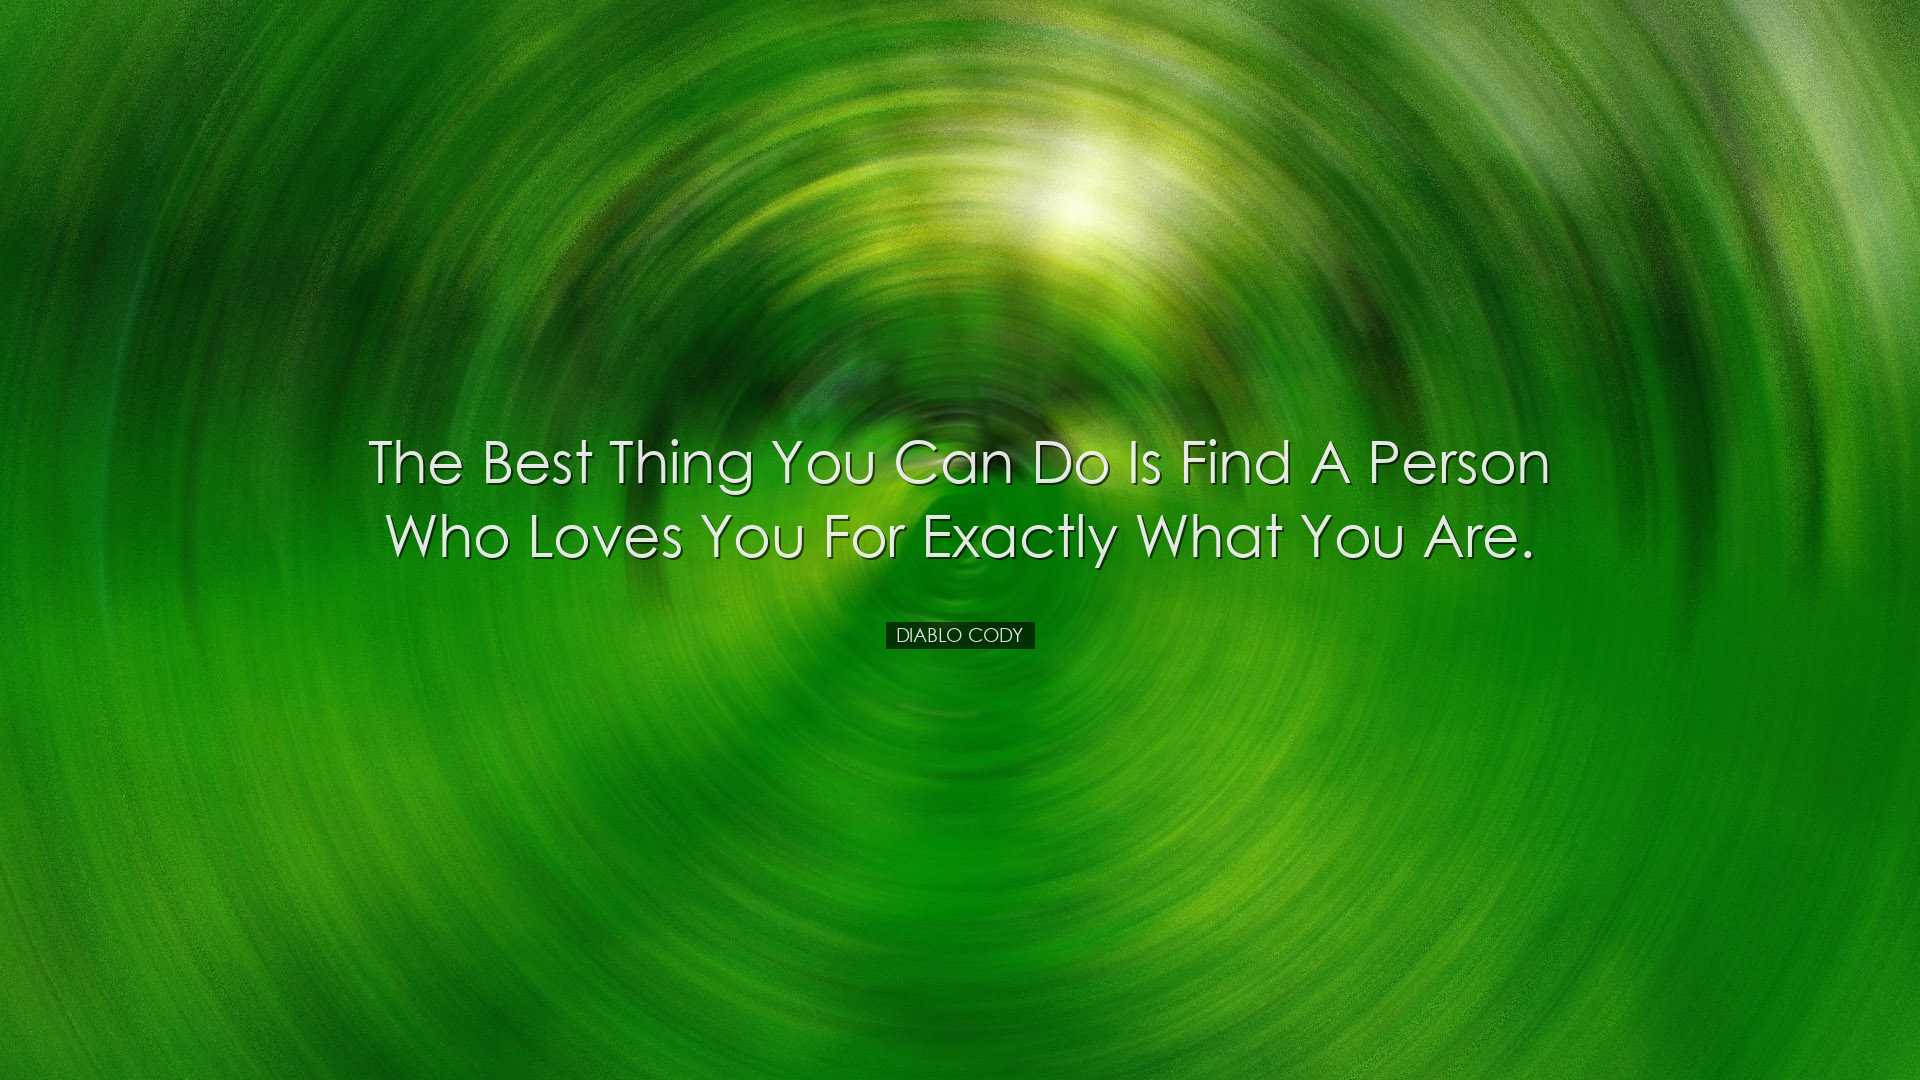 The best thing you can do is find a person who loves you for exact